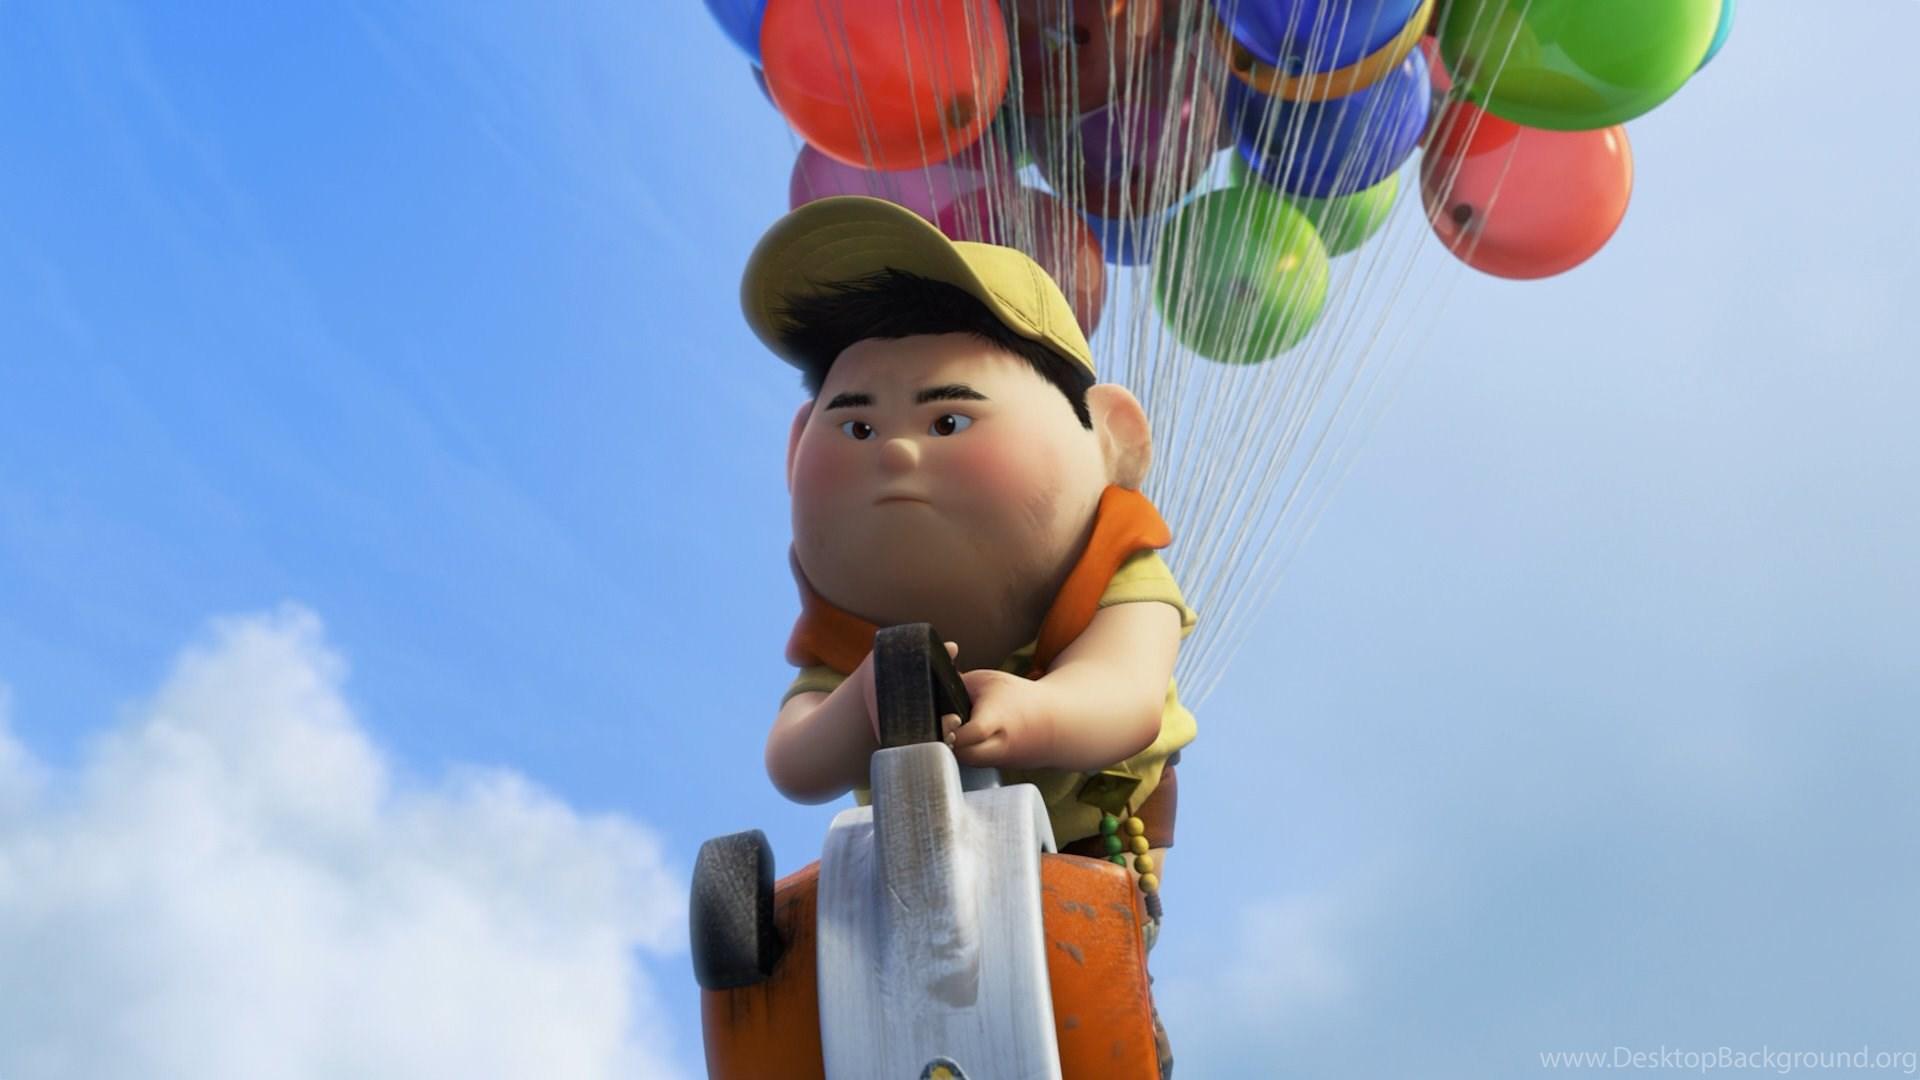 Russell (Up) 1080P, 2K, 4K, 5K HD wallpapers free download | Wallpaper Flare